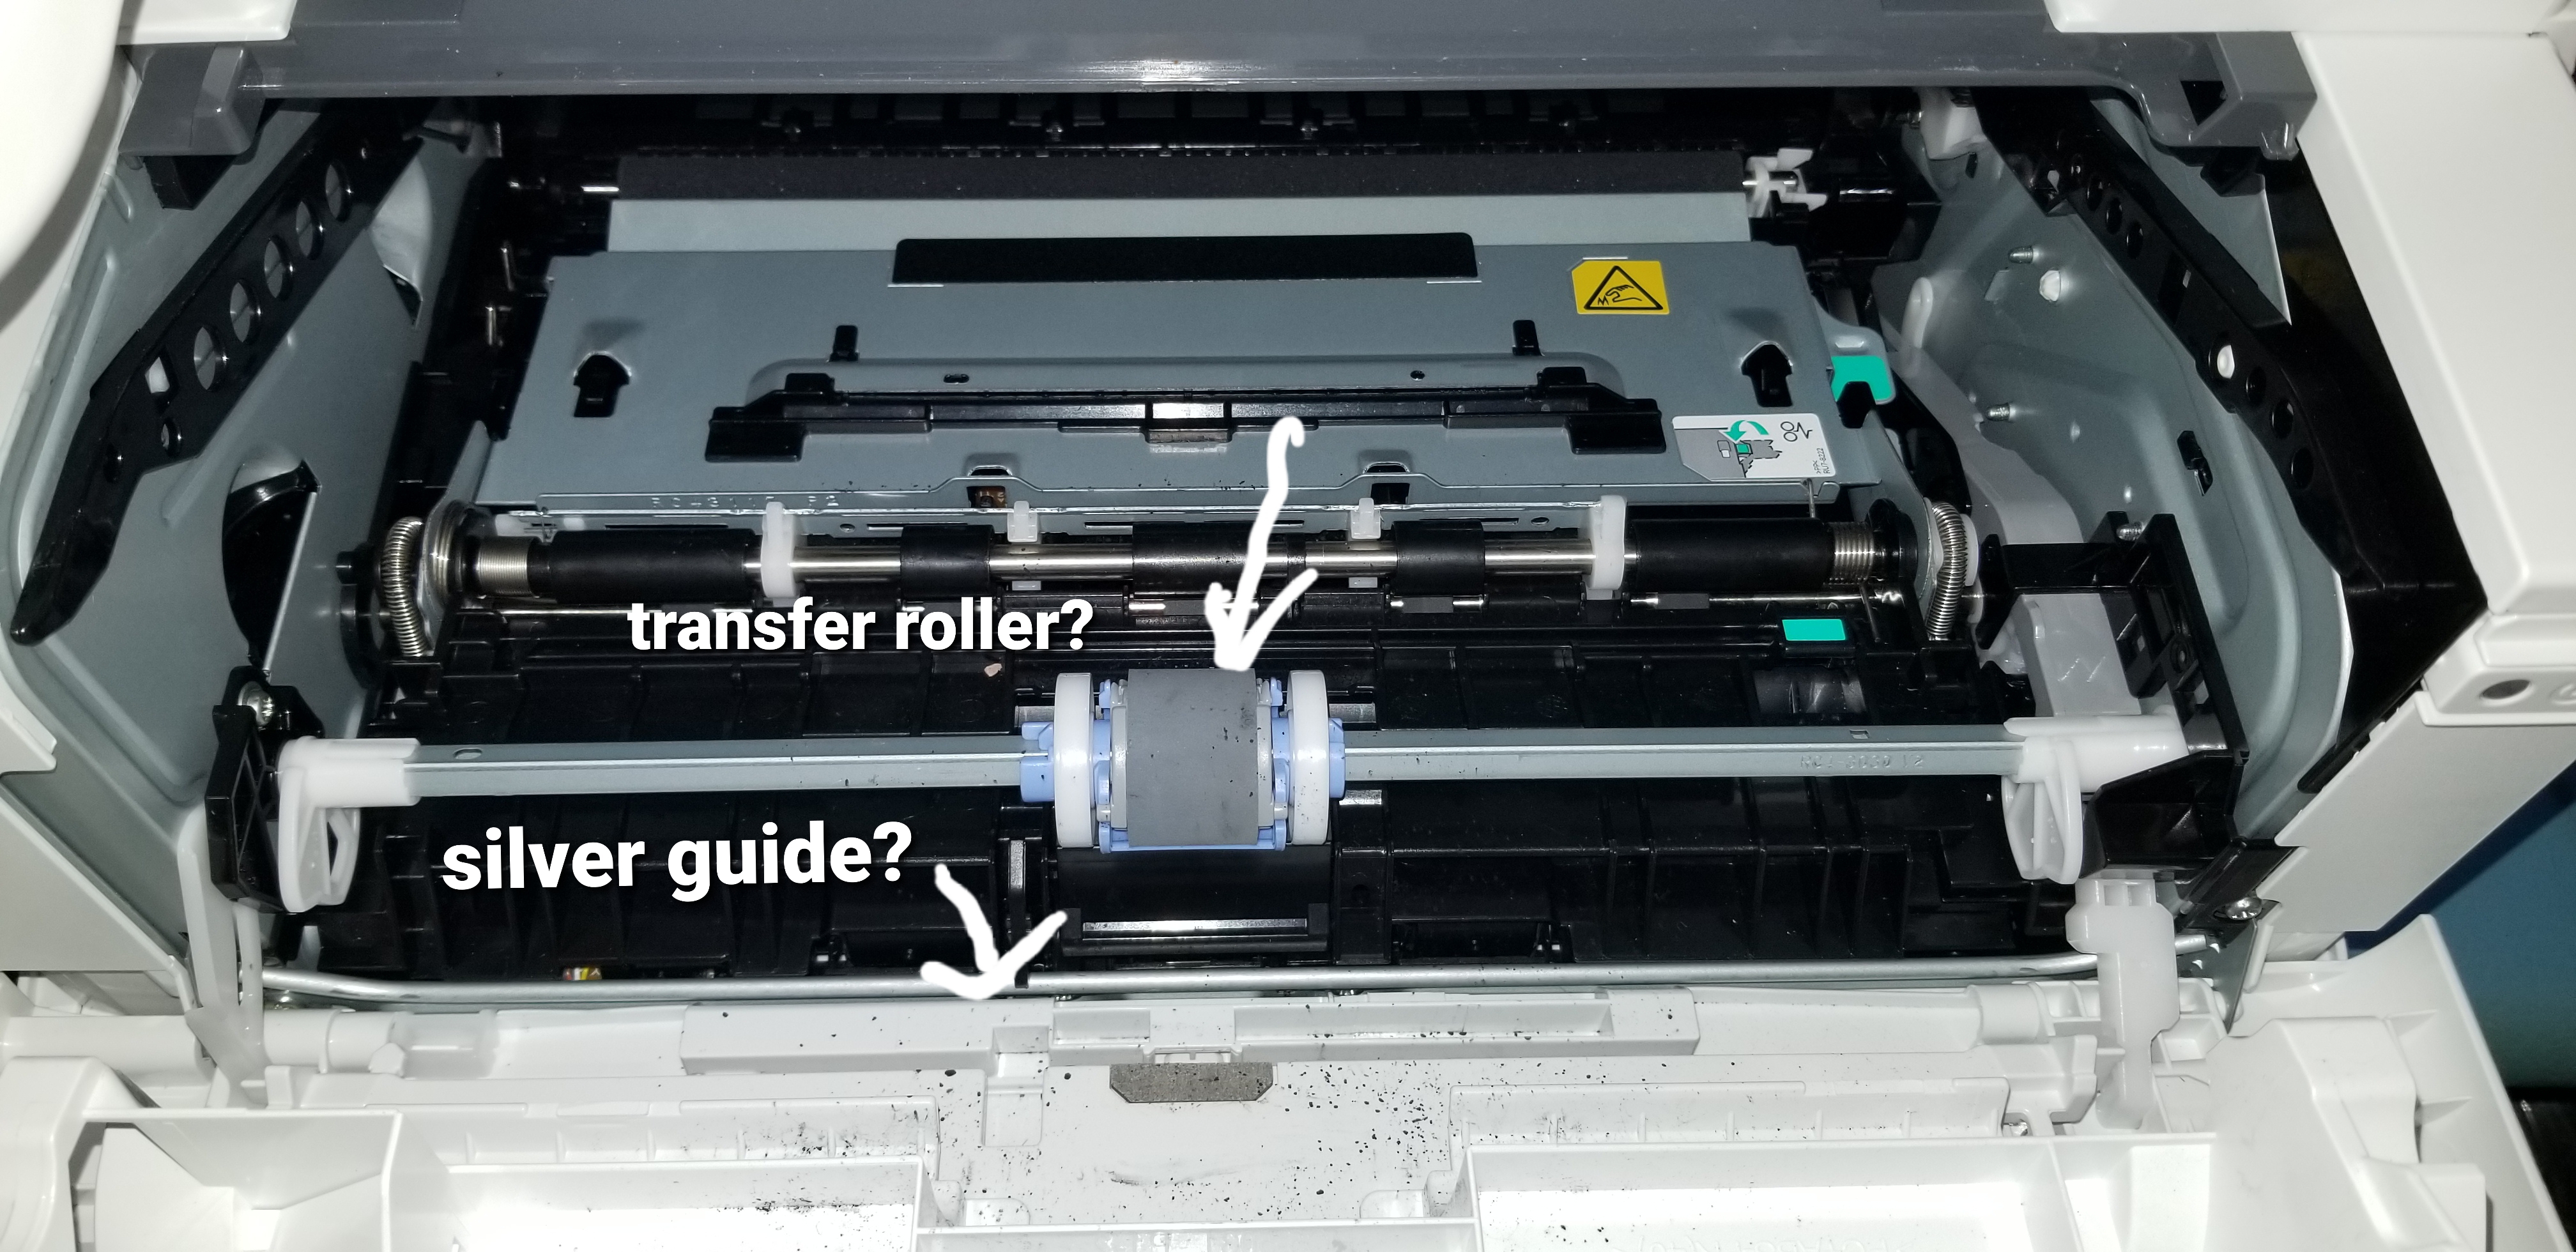 Solved: mfp m428fdw. can't fit toner cartridge back into printer - HP  Support Community - 7752415